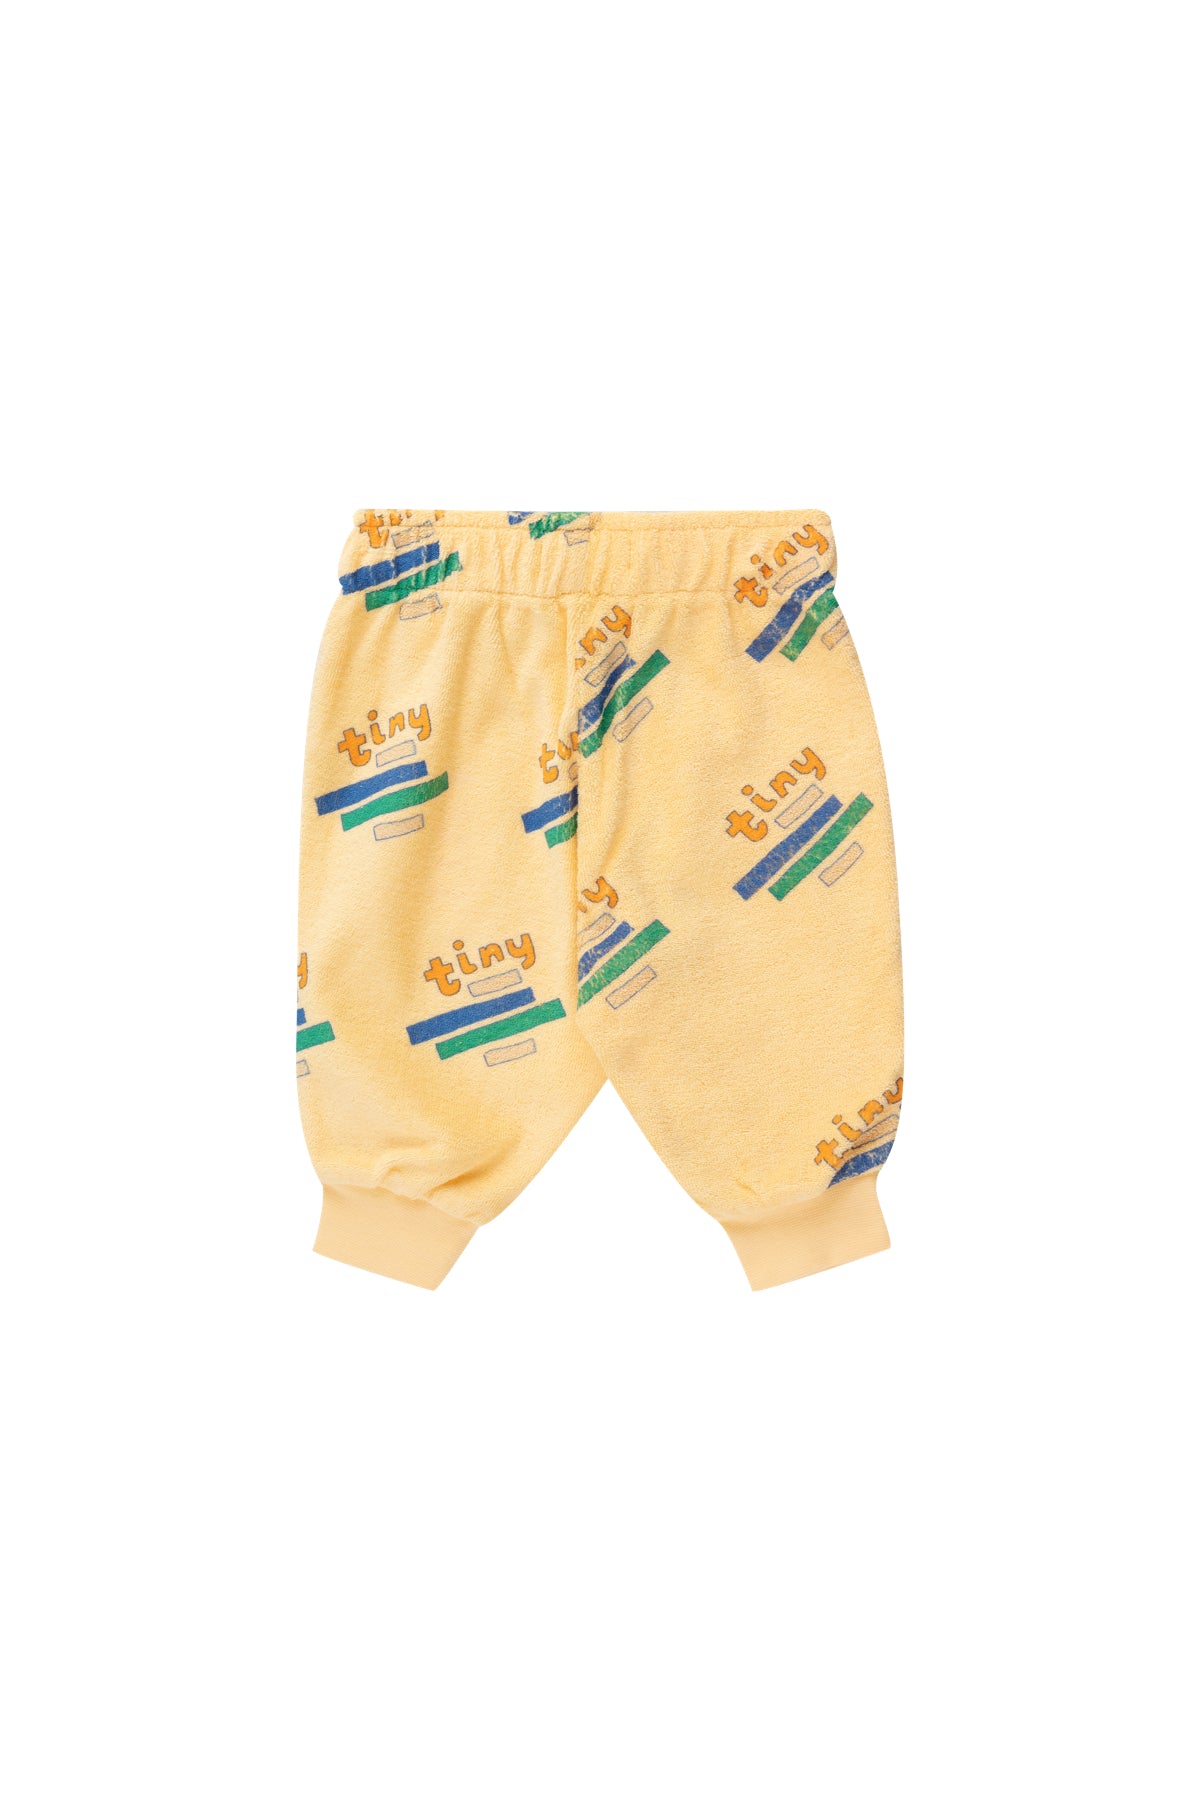 Tiny Cottons - baby sweatpants - mellow yellow